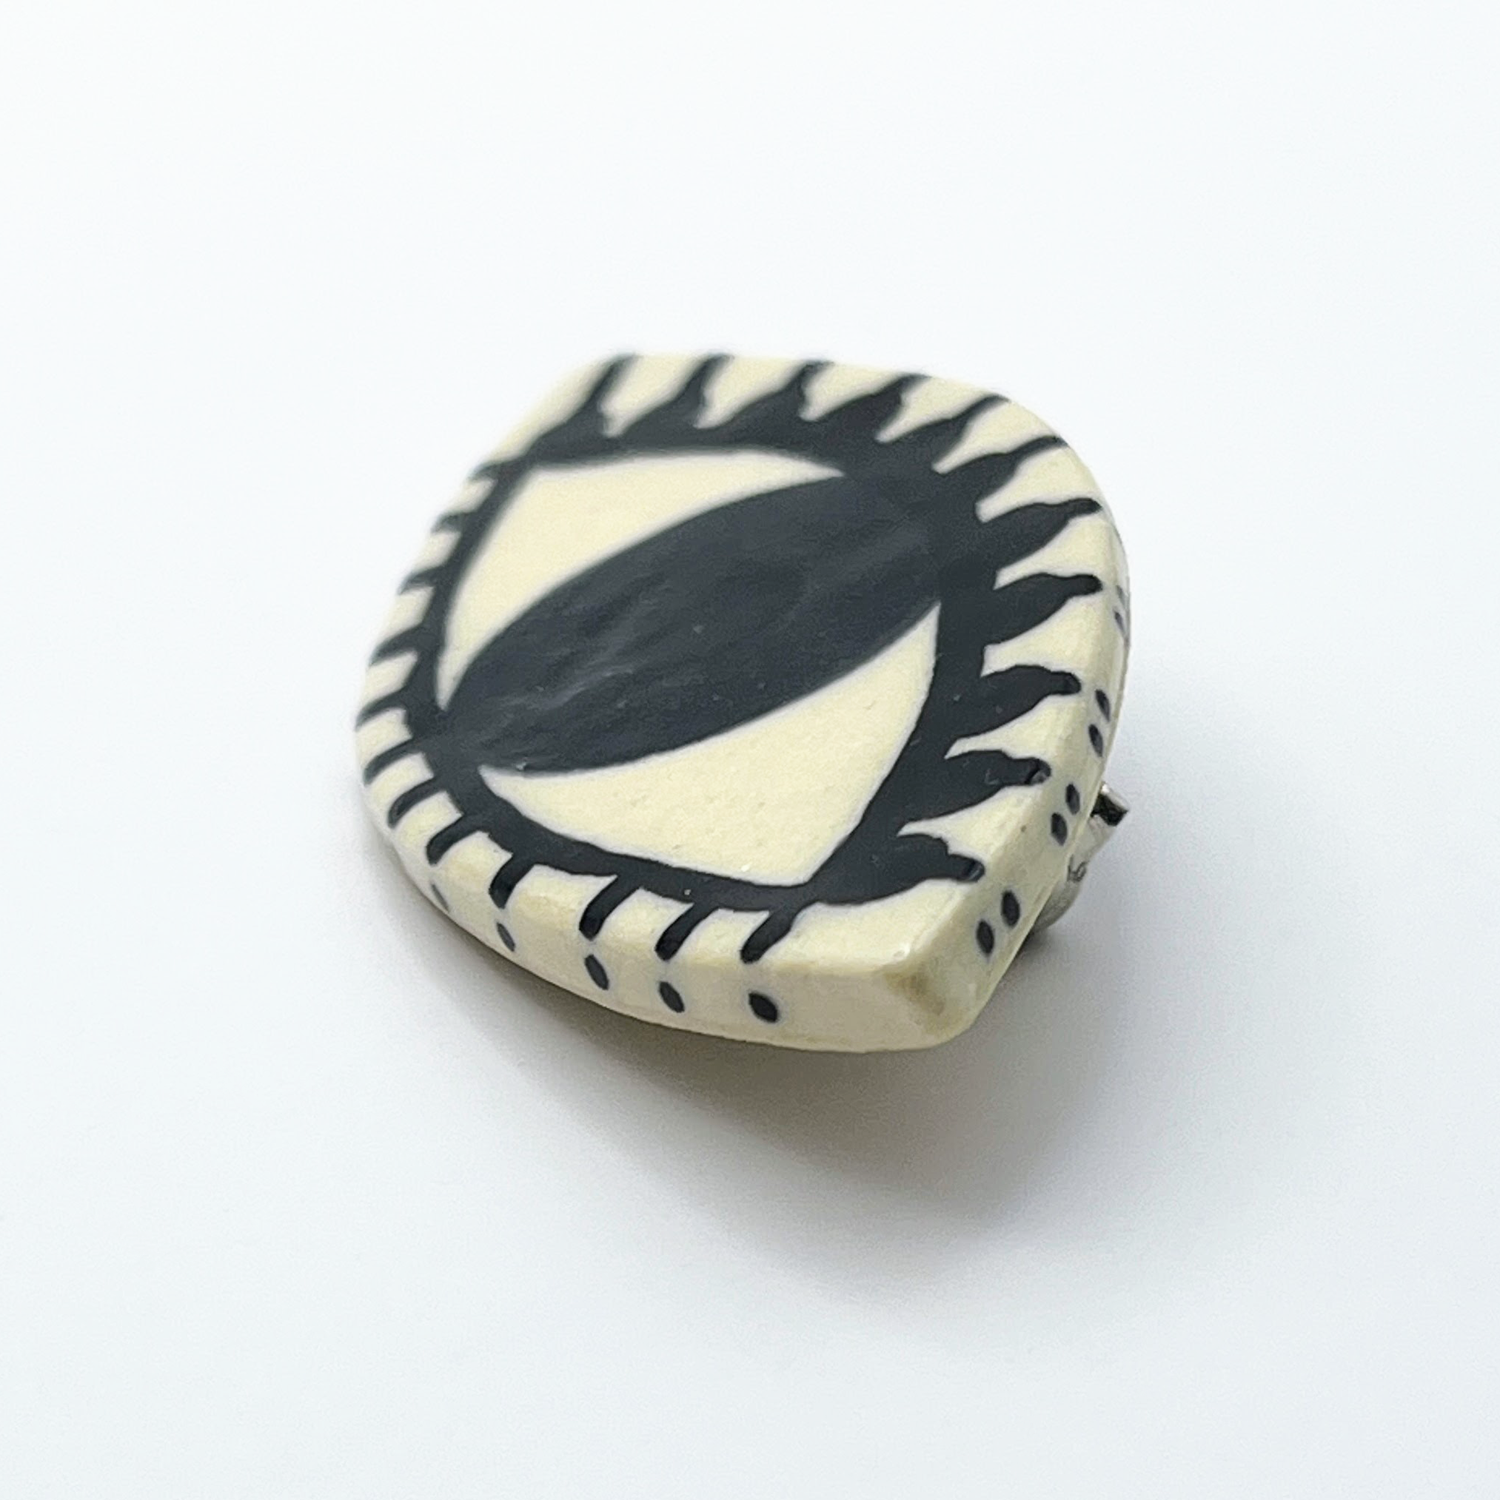 Here and Here: Green and Black Eye Brooch with Dotted Lashes Product Image 2 of 2